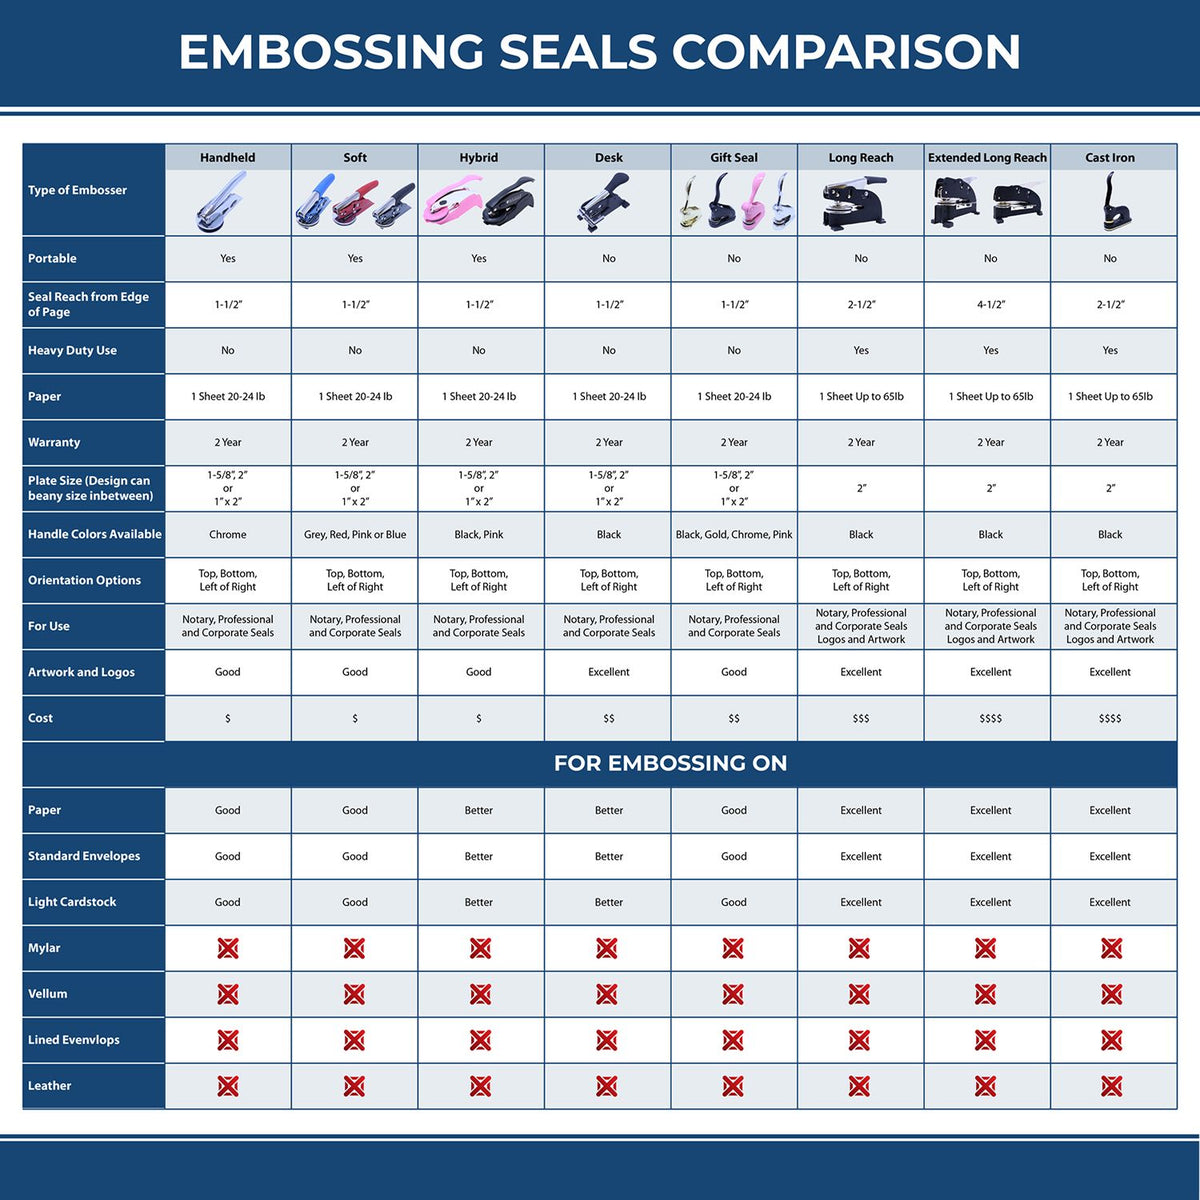 A comparison chart for the different types of mount models available for the Gift Michigan Geologist Seal